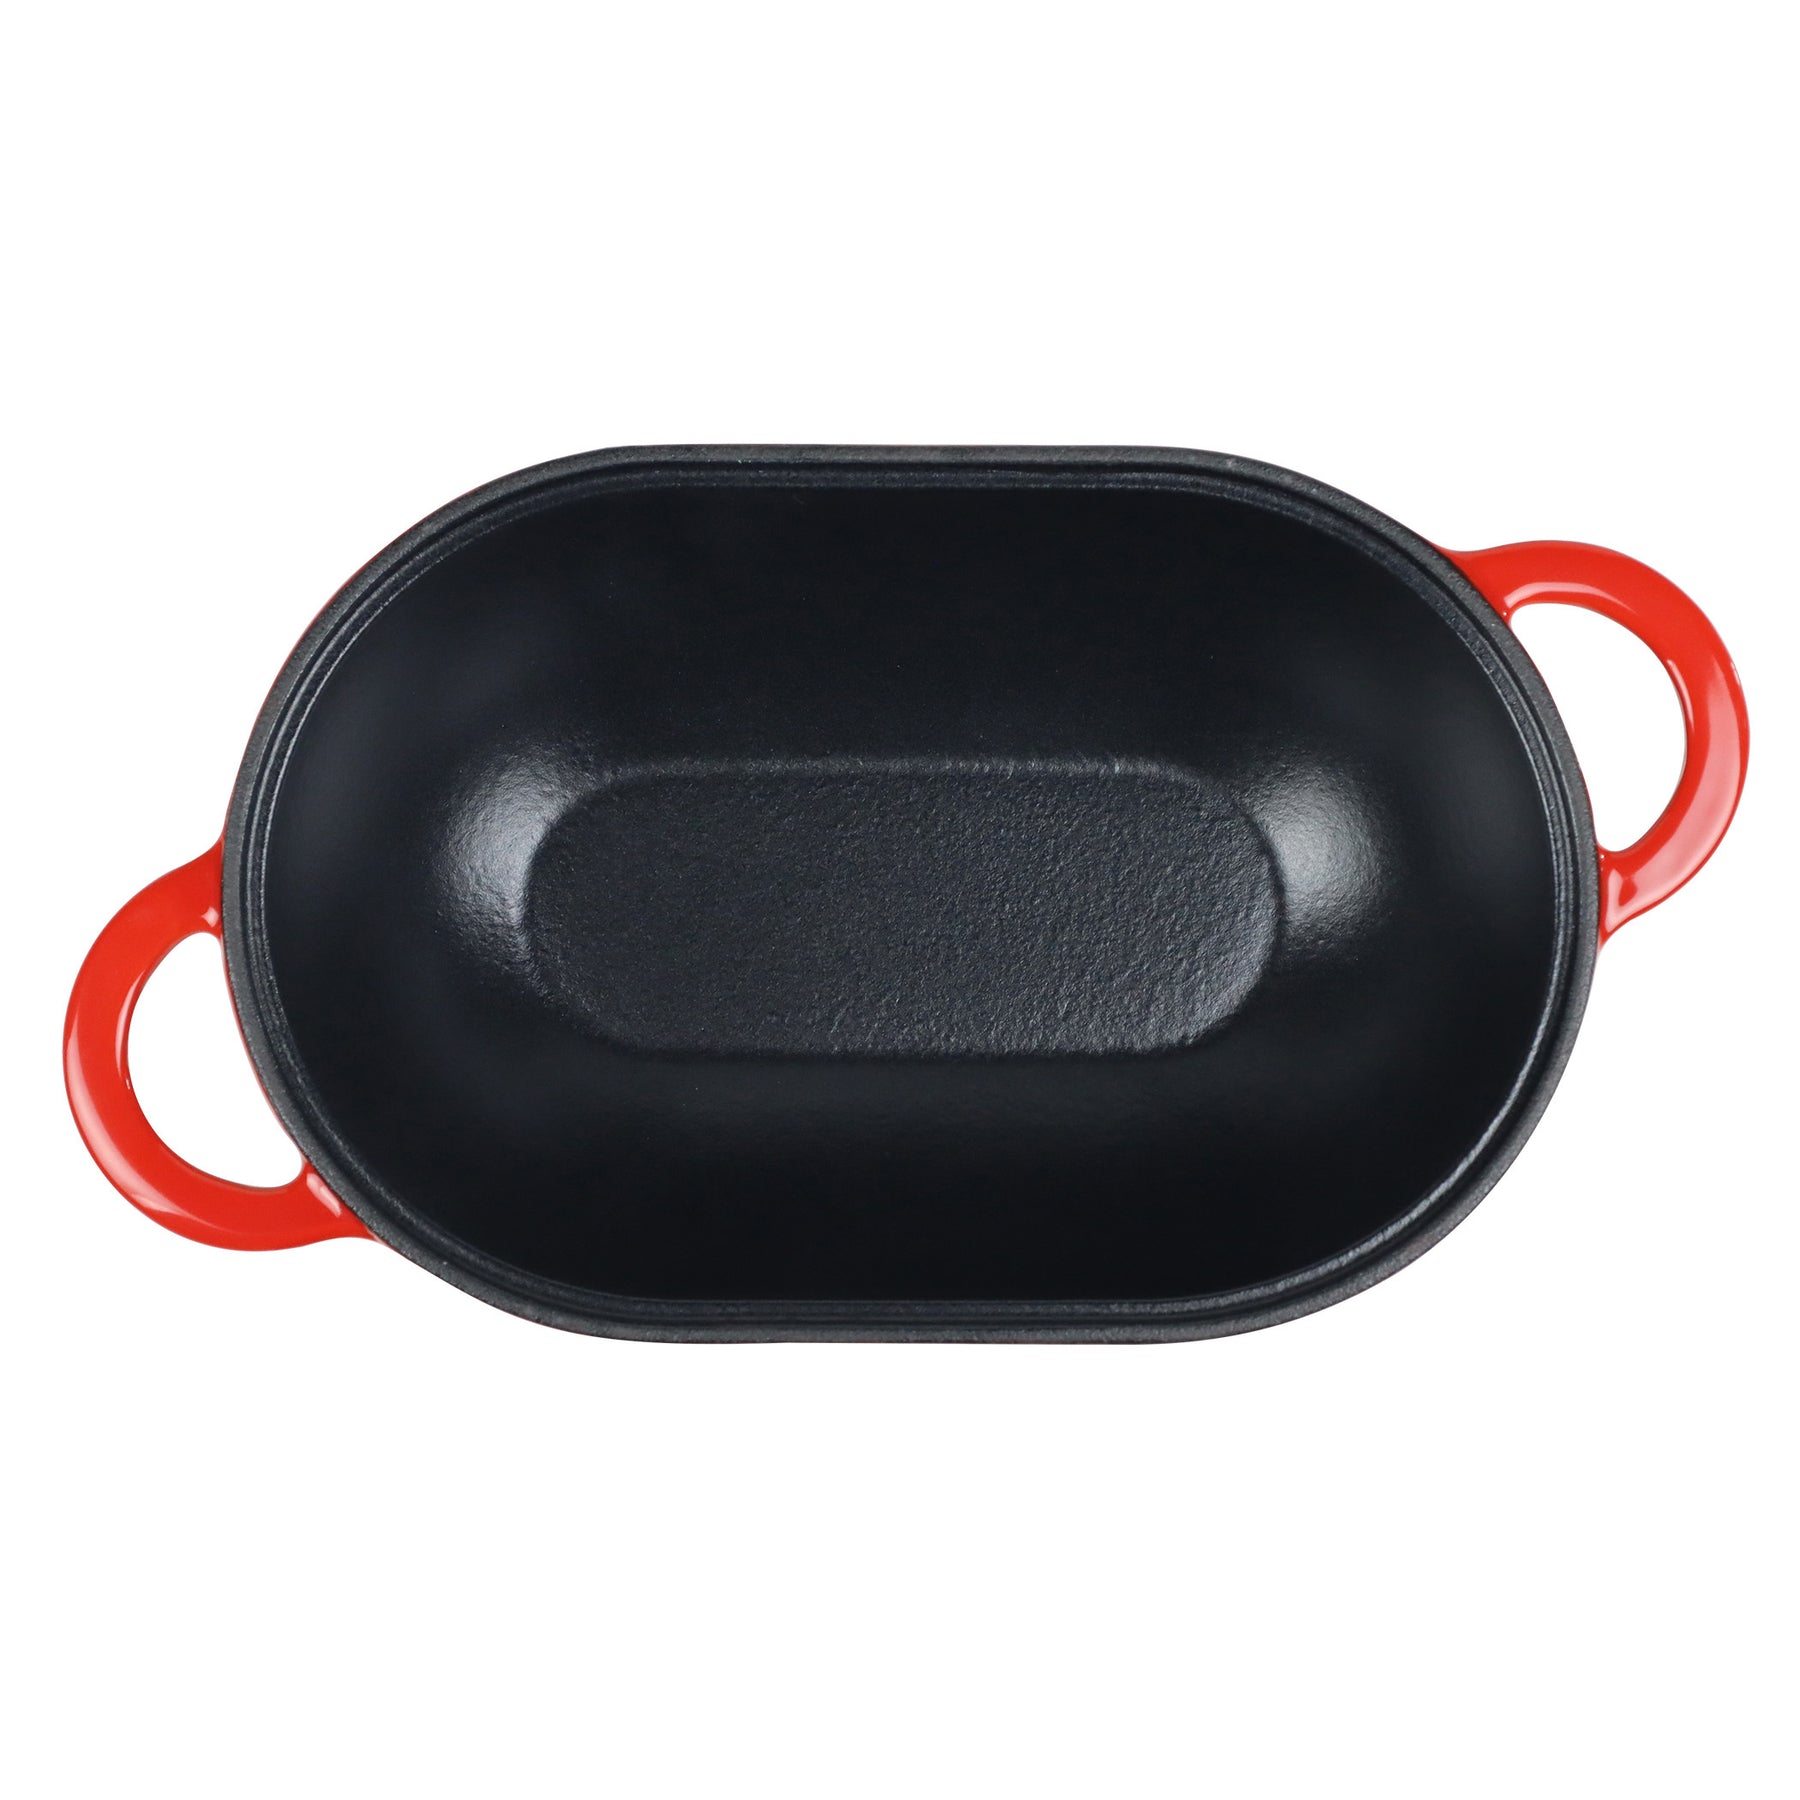 Buy wholesale Cast Iron Bread Pan Dutch oven with Lid – Oven Safe Form for  Baking, Artisan Bread Kit - Loaf Pan